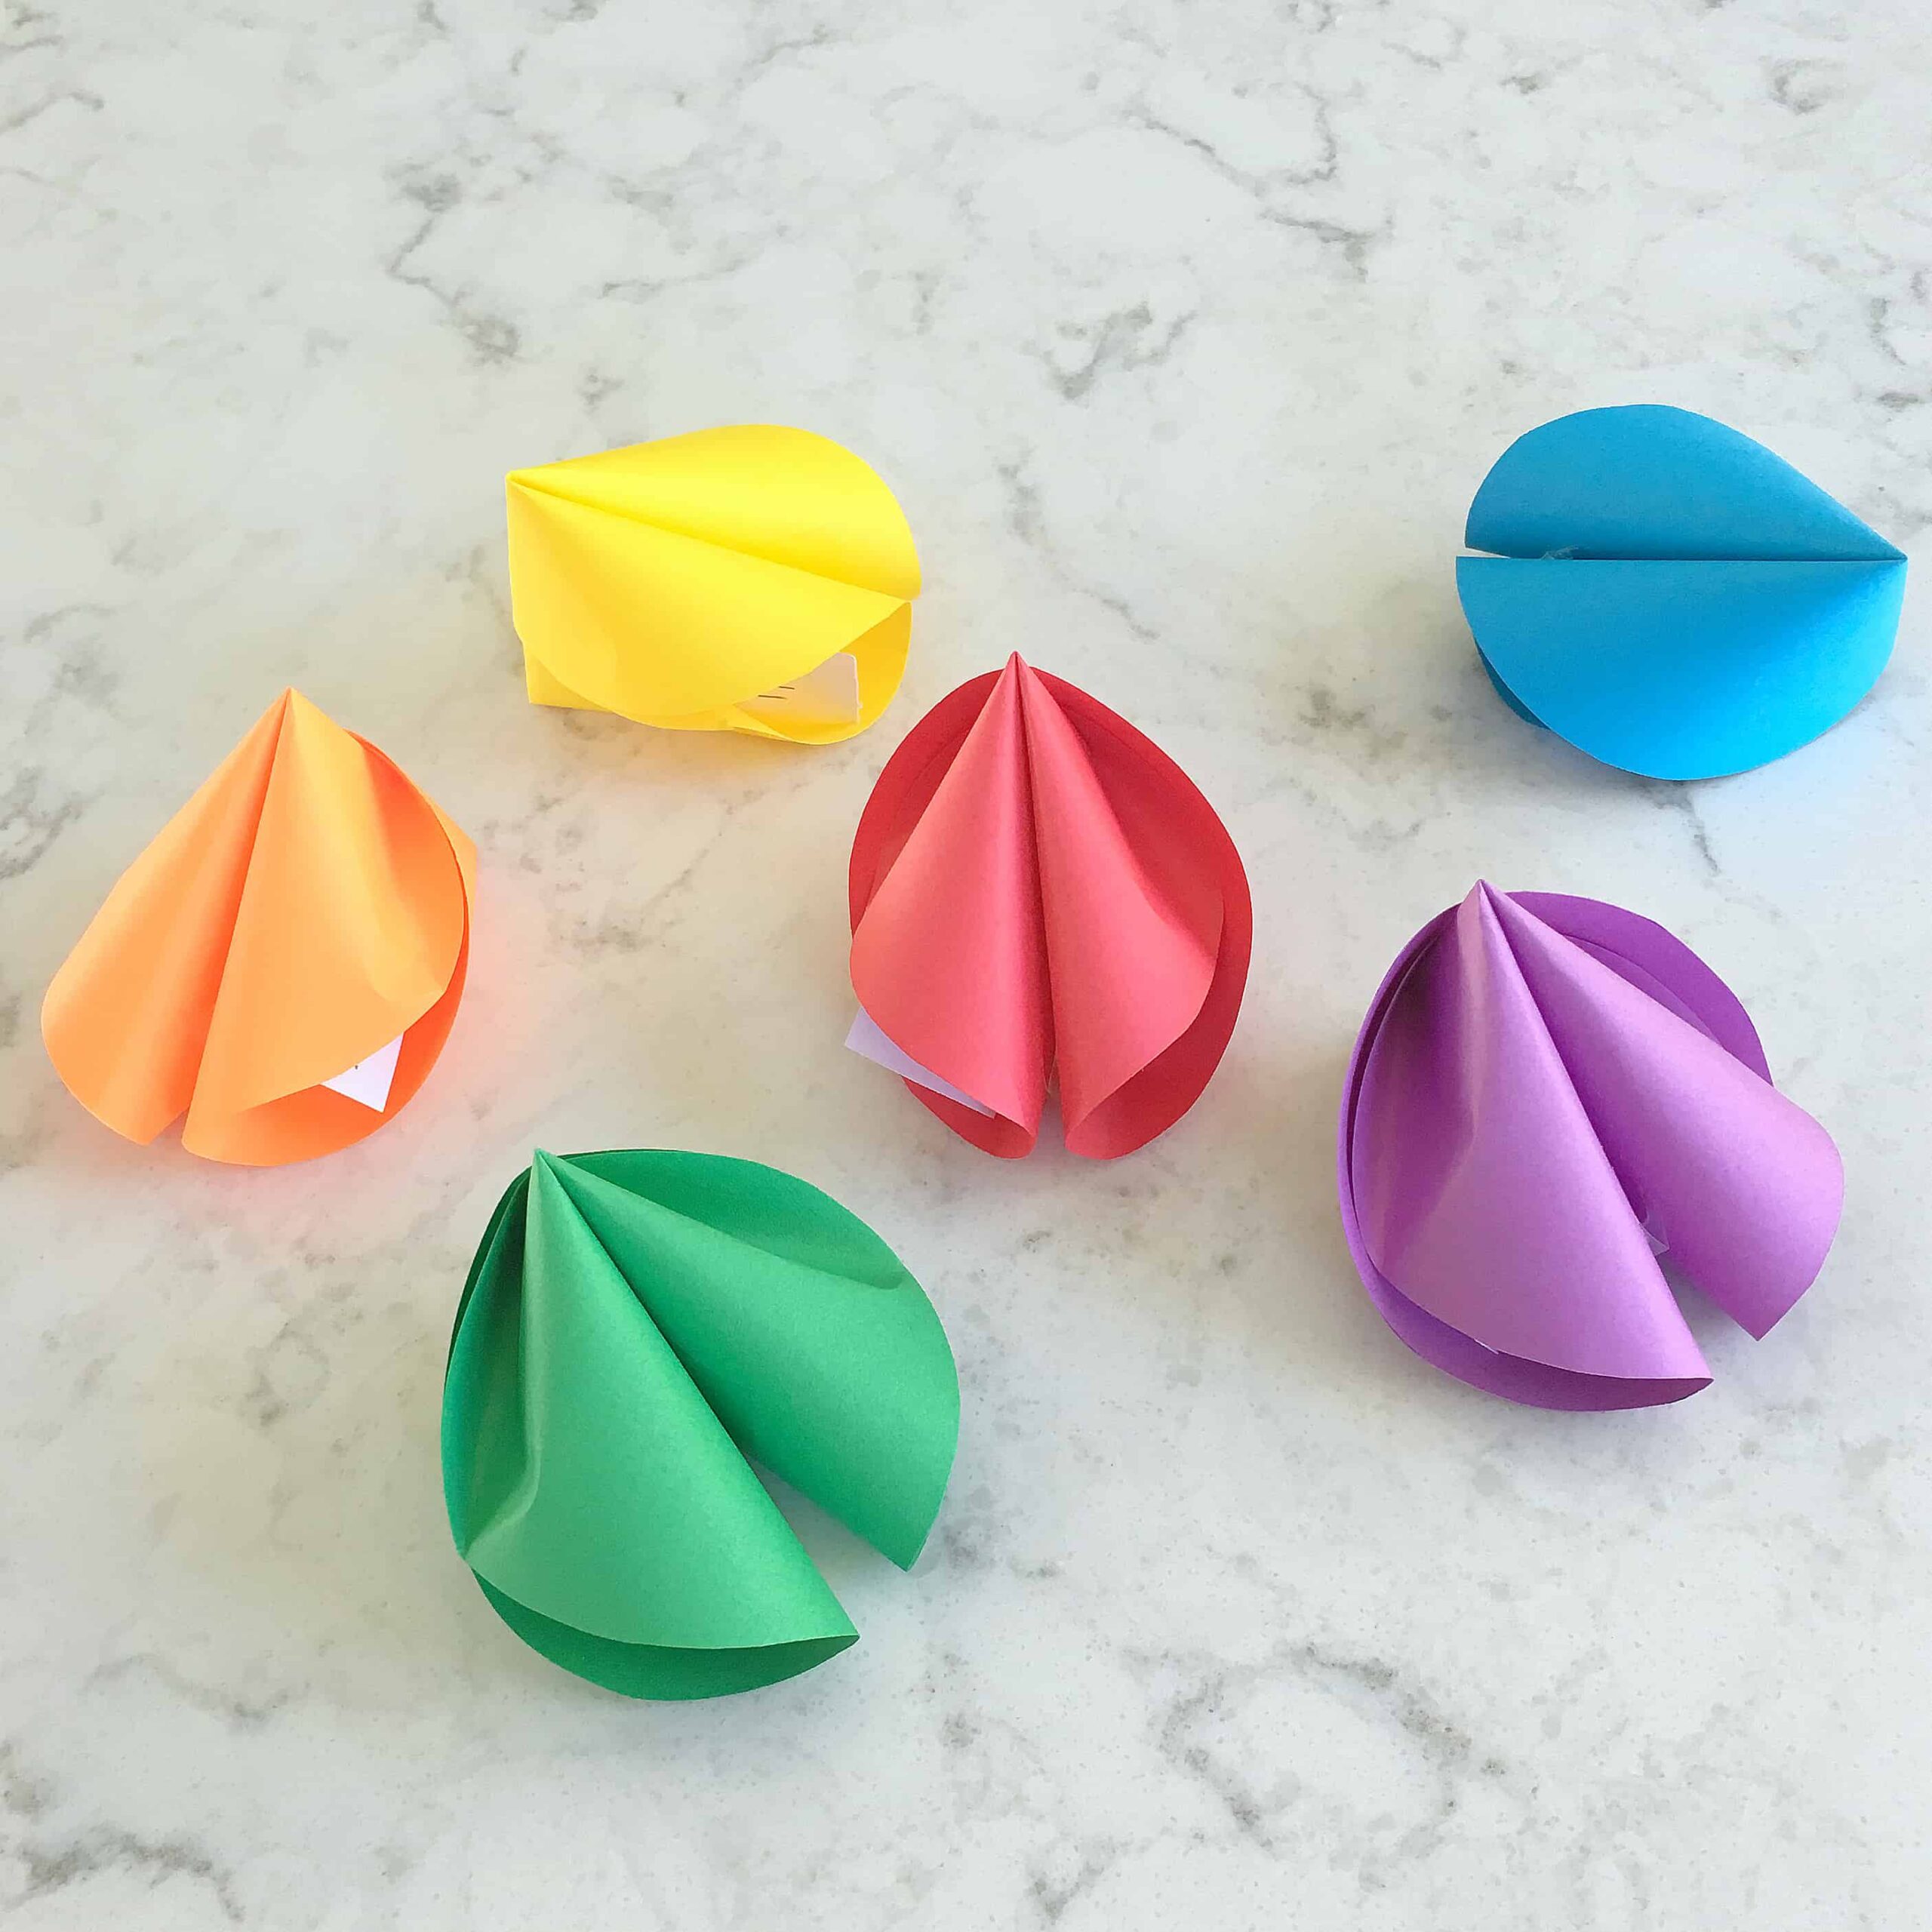 How to Make Paper Fortune Cookies with a Template (Video Tutorial)